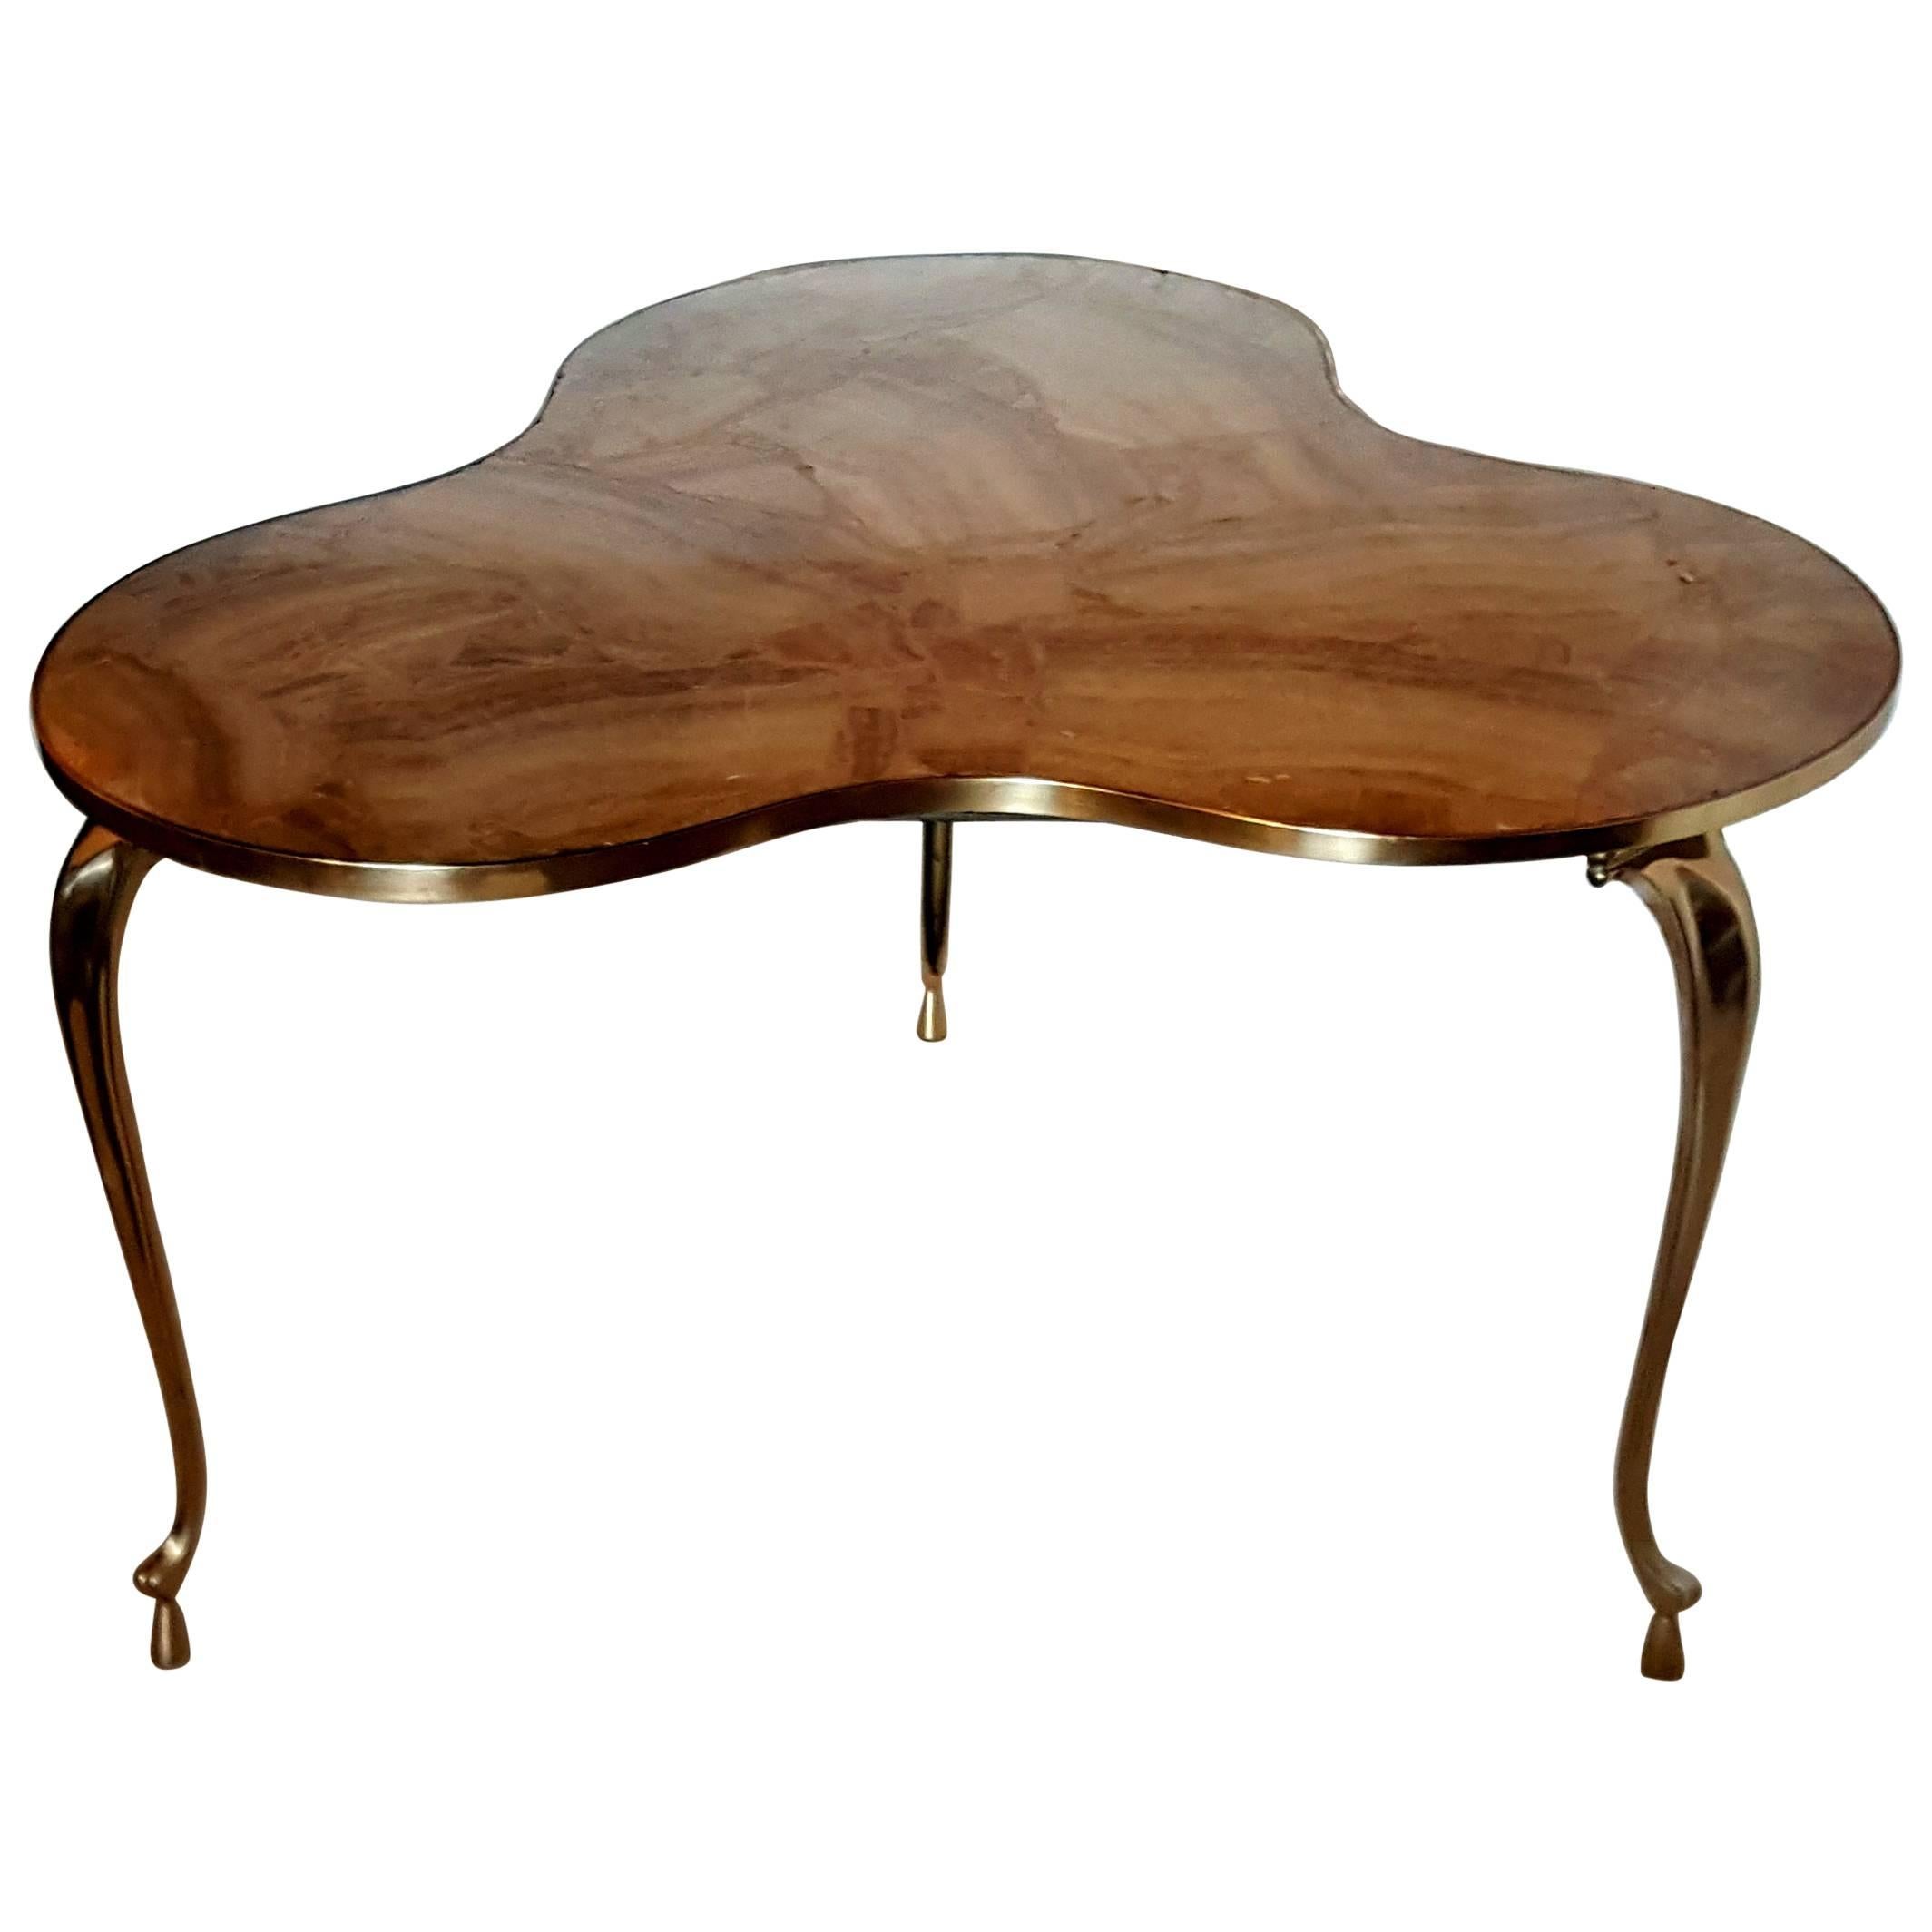 Willy Daro Style Coffee Table